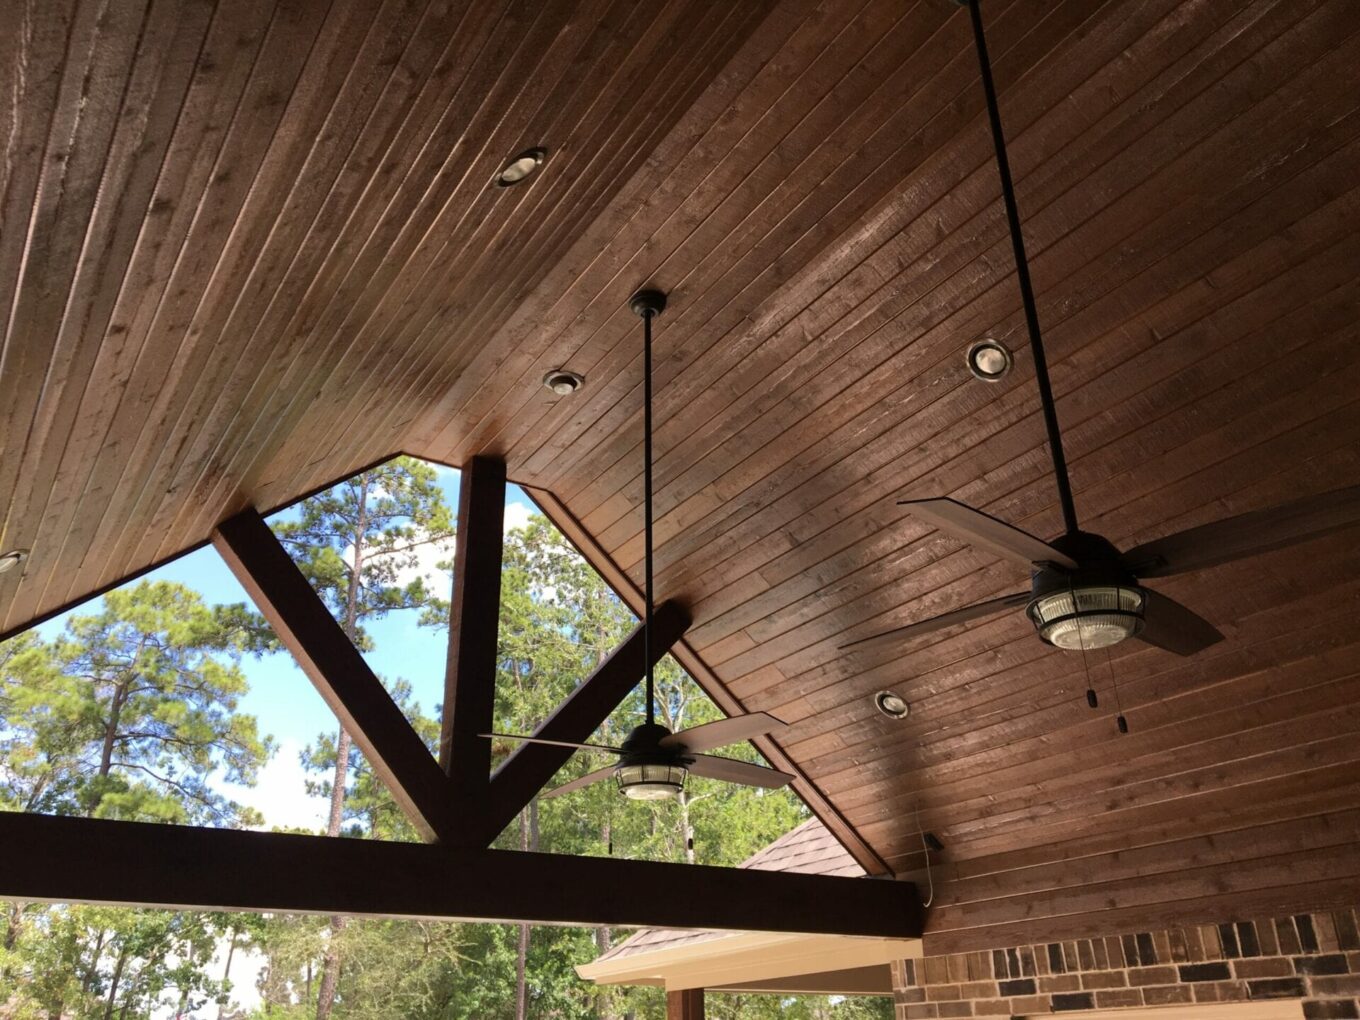 A ceiling with lights and fans in the middle of an outdoor room.